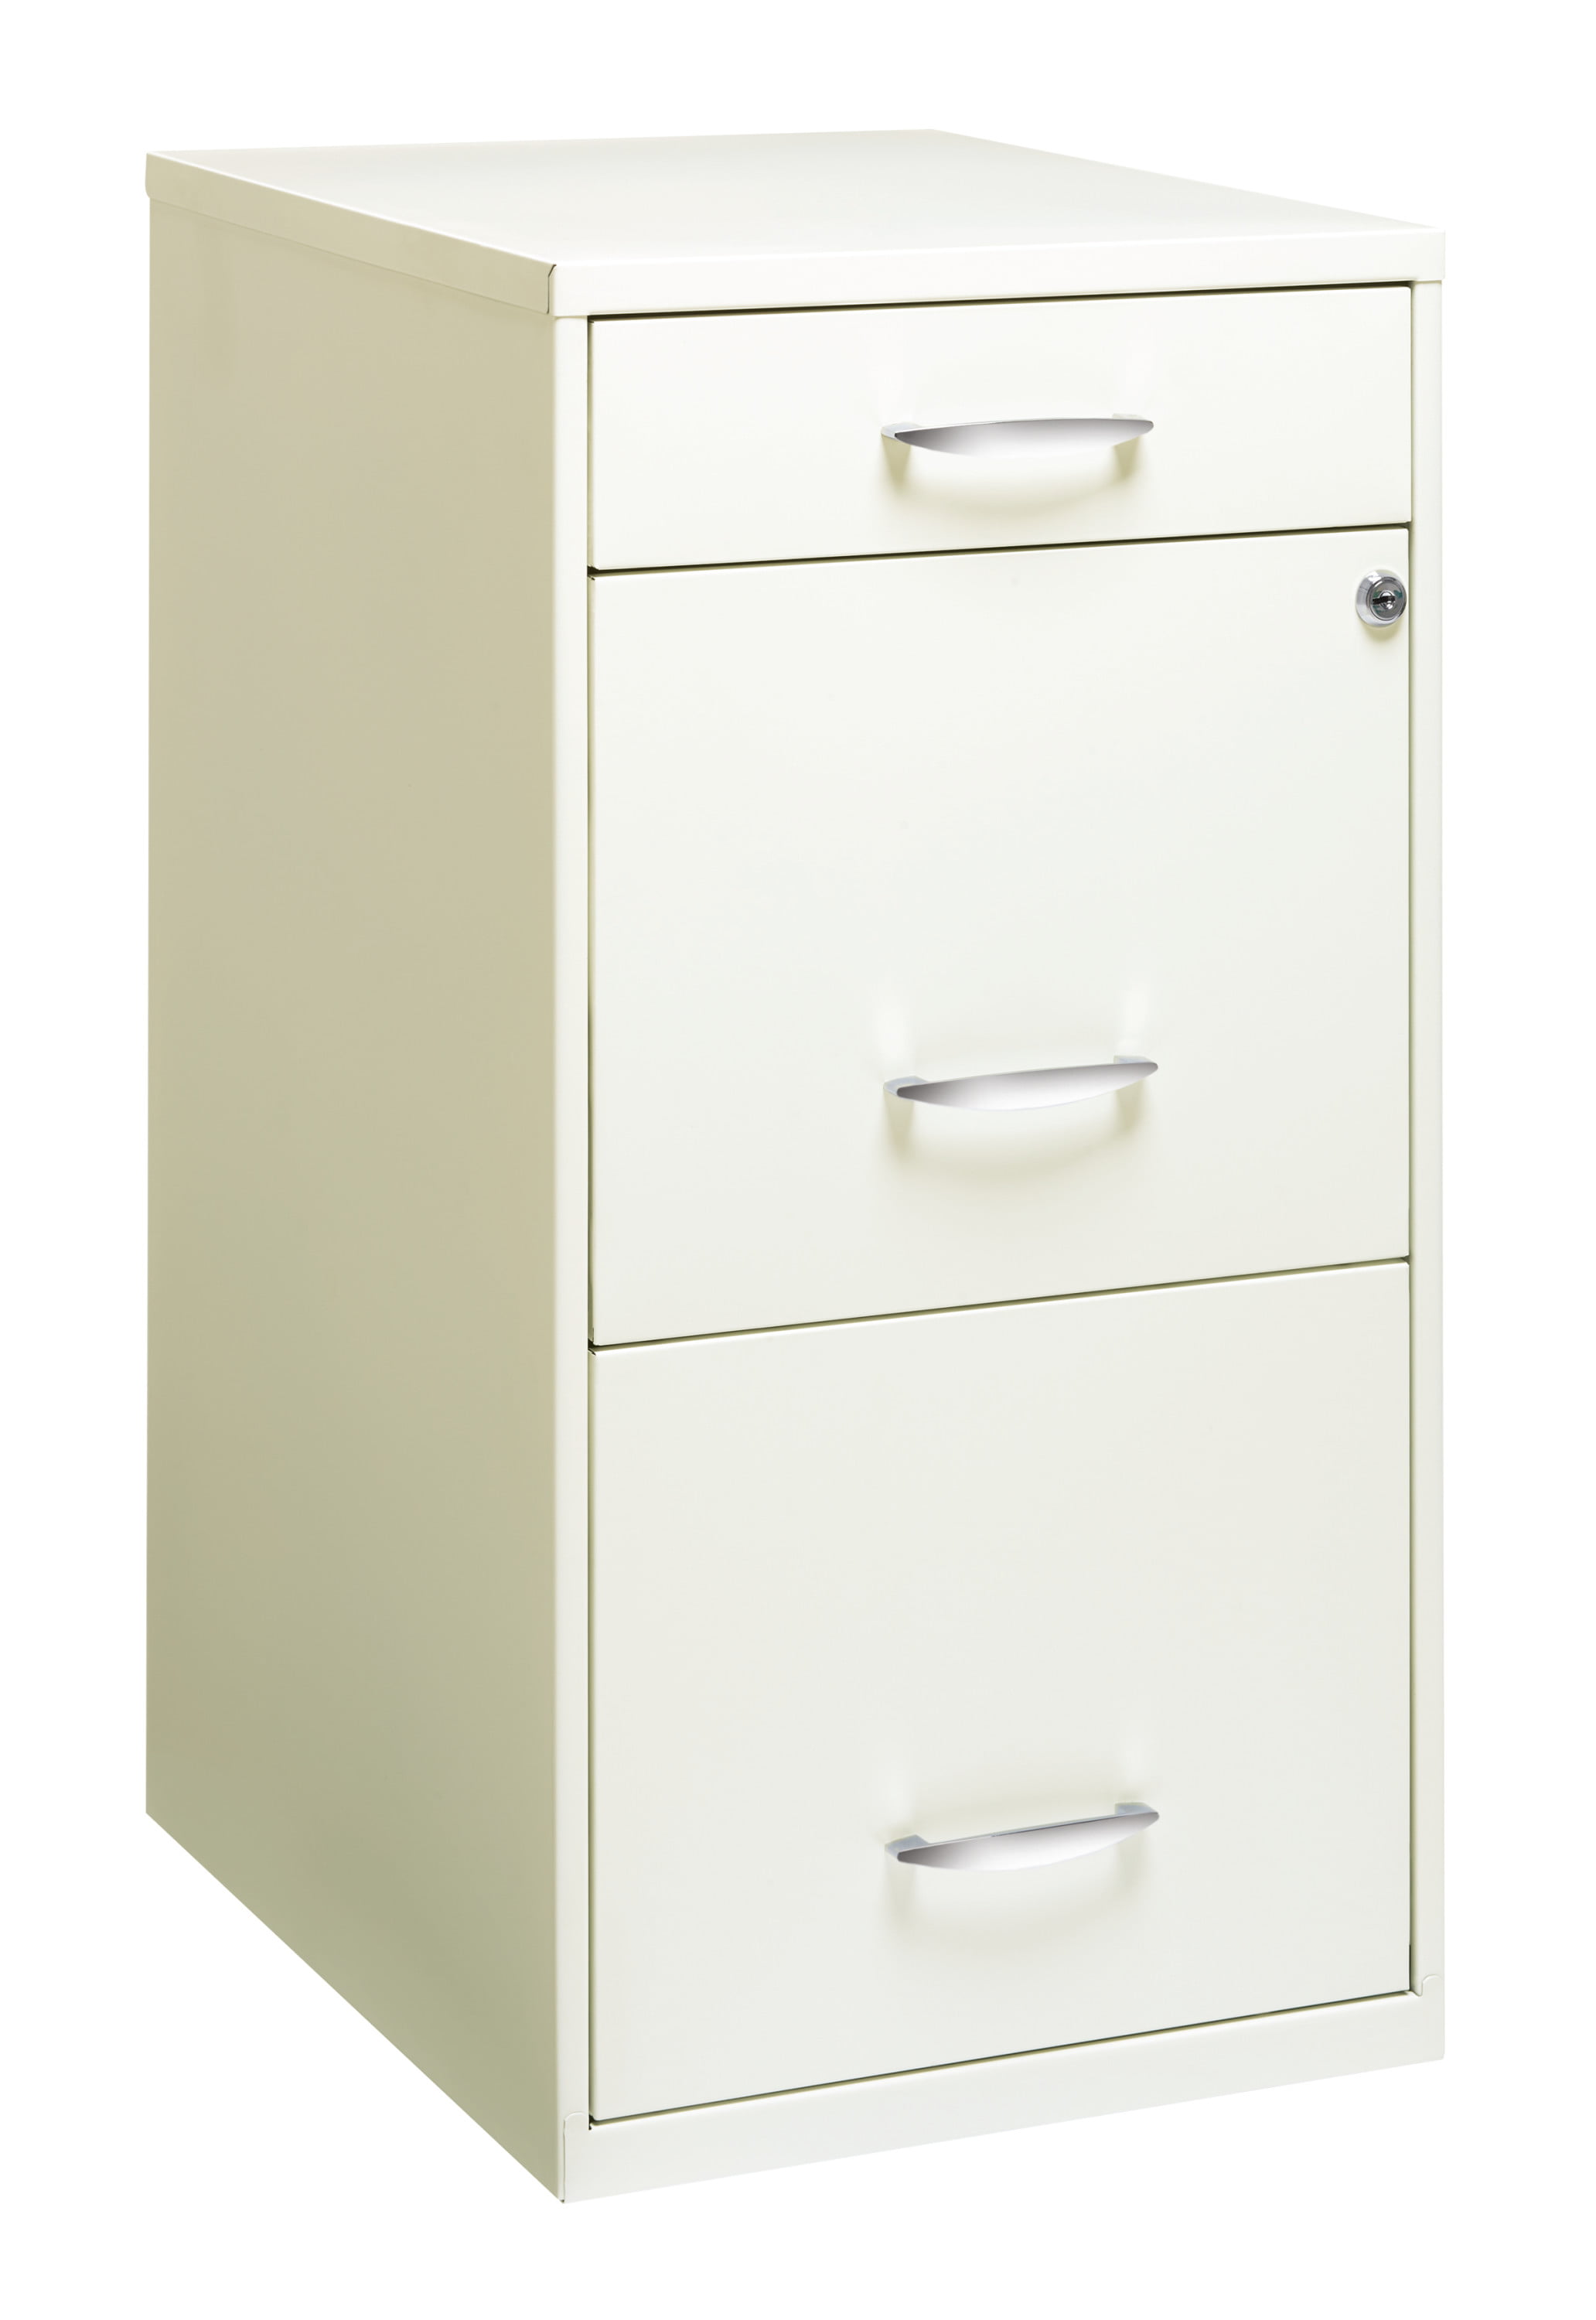 Space Solutions 3 Drawer File Cabinet, Three Drawer Filing Cabinet On Wheels